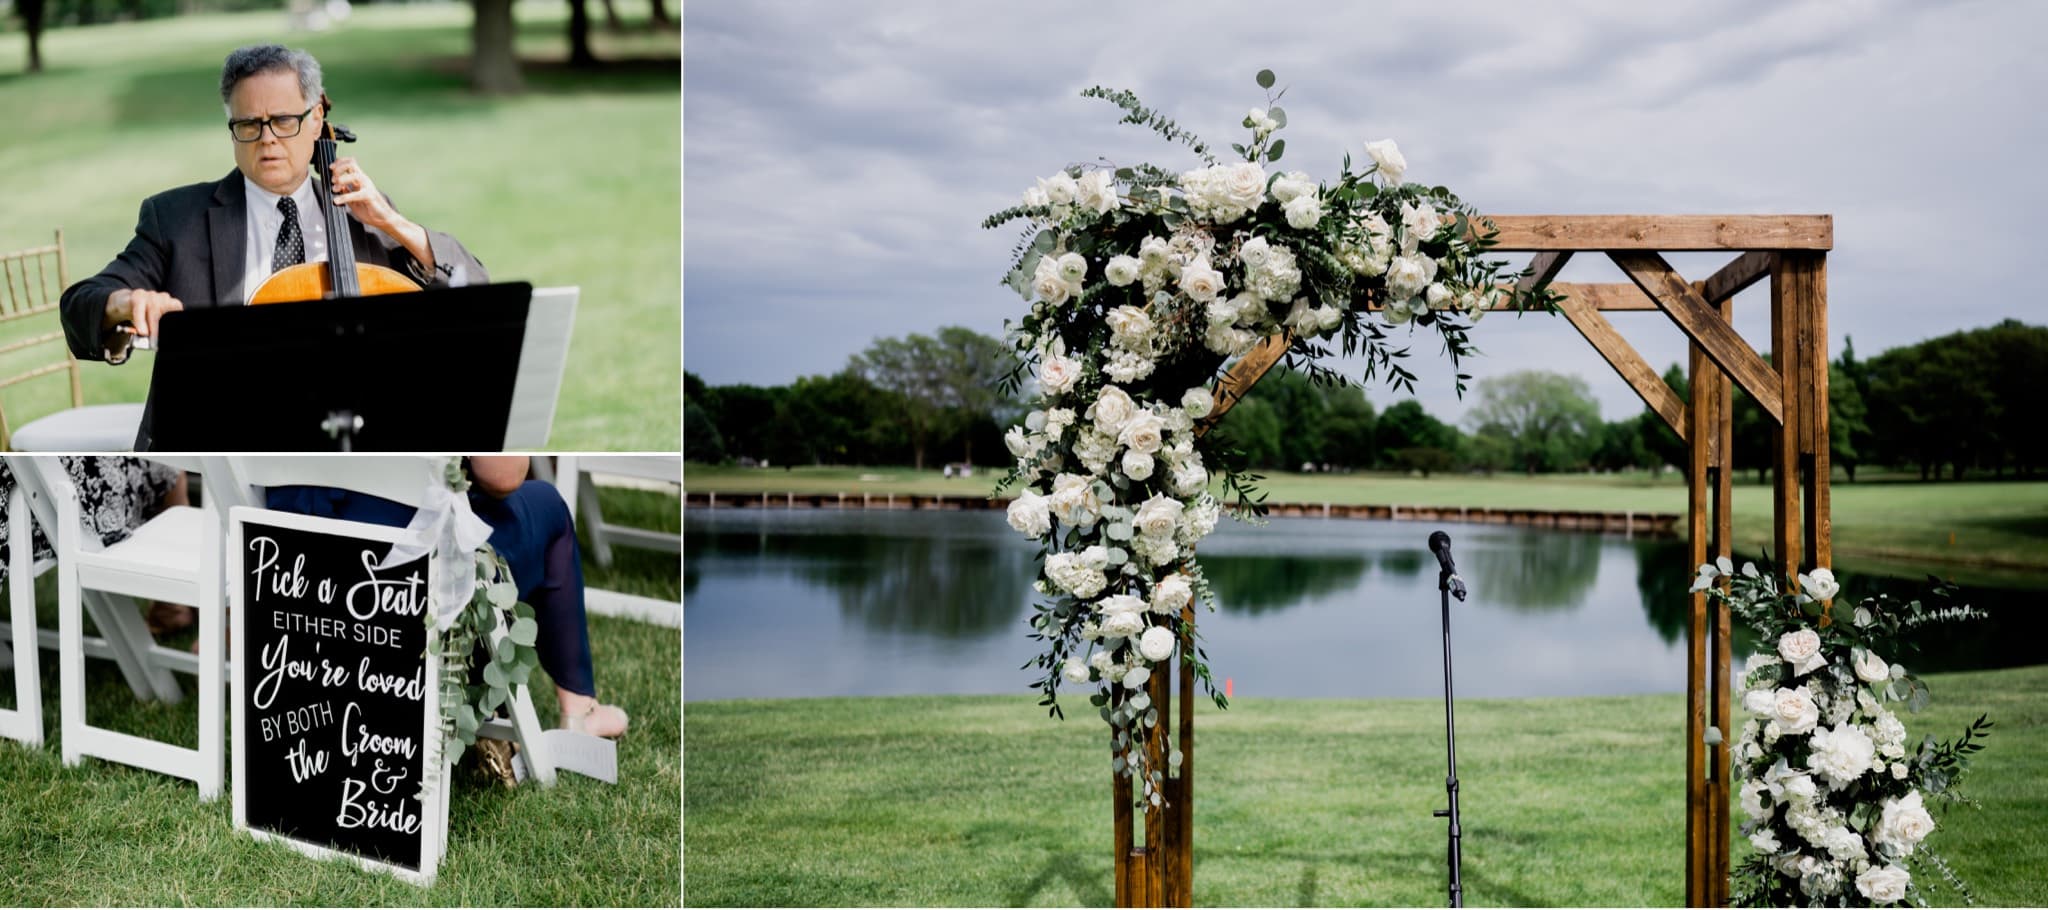 Des Moines Golf and Country Club wedding ceremony